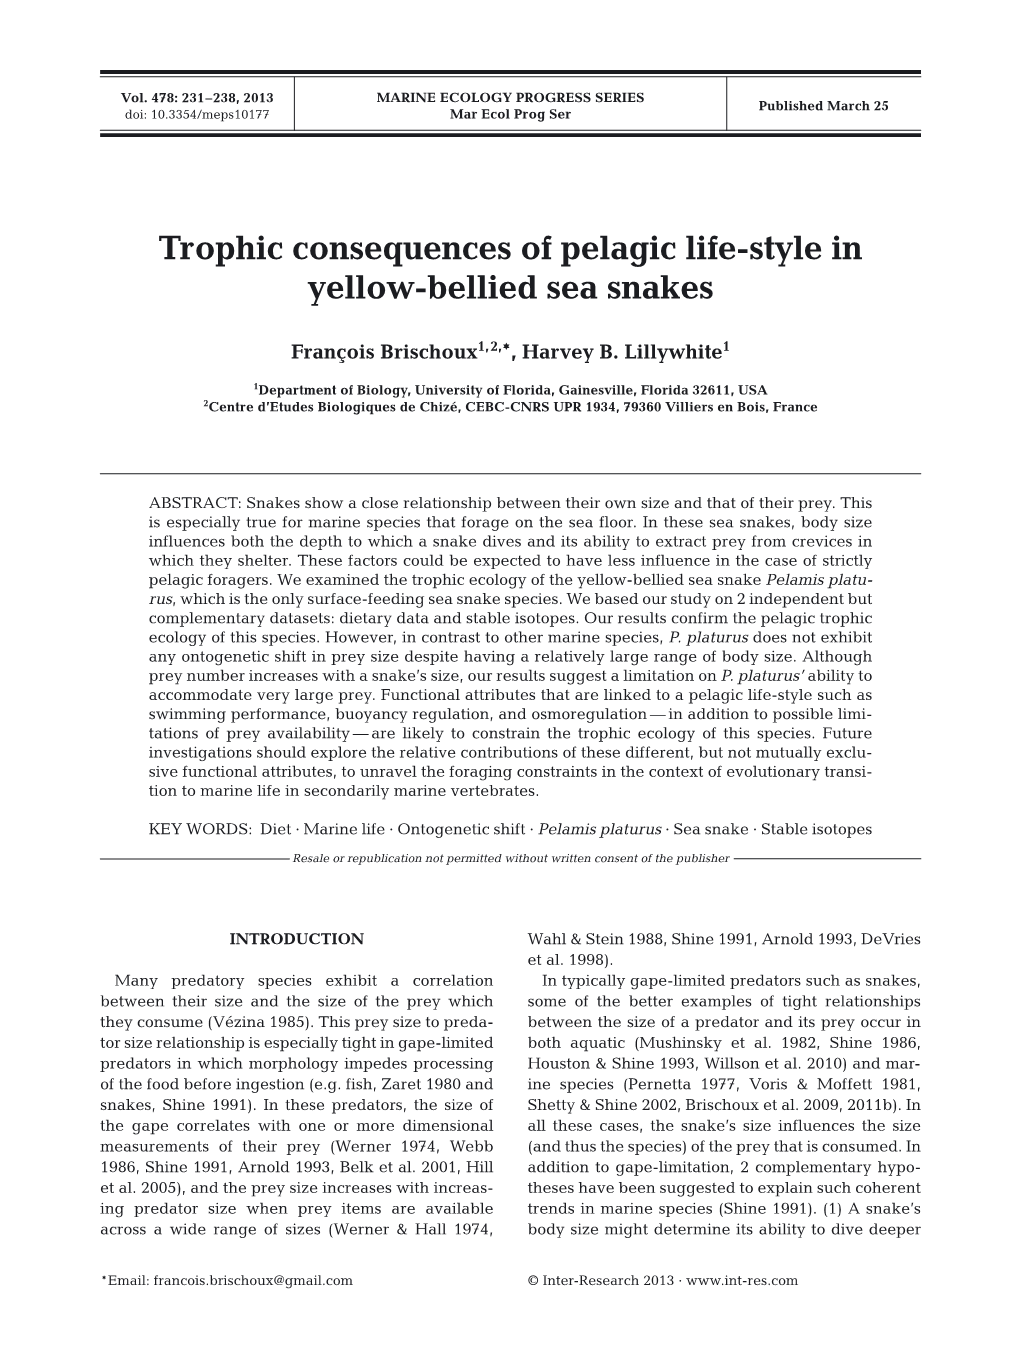 Trophic Consequences of Pelagic Life-Style in Yellow-Bellied Sea Snakes